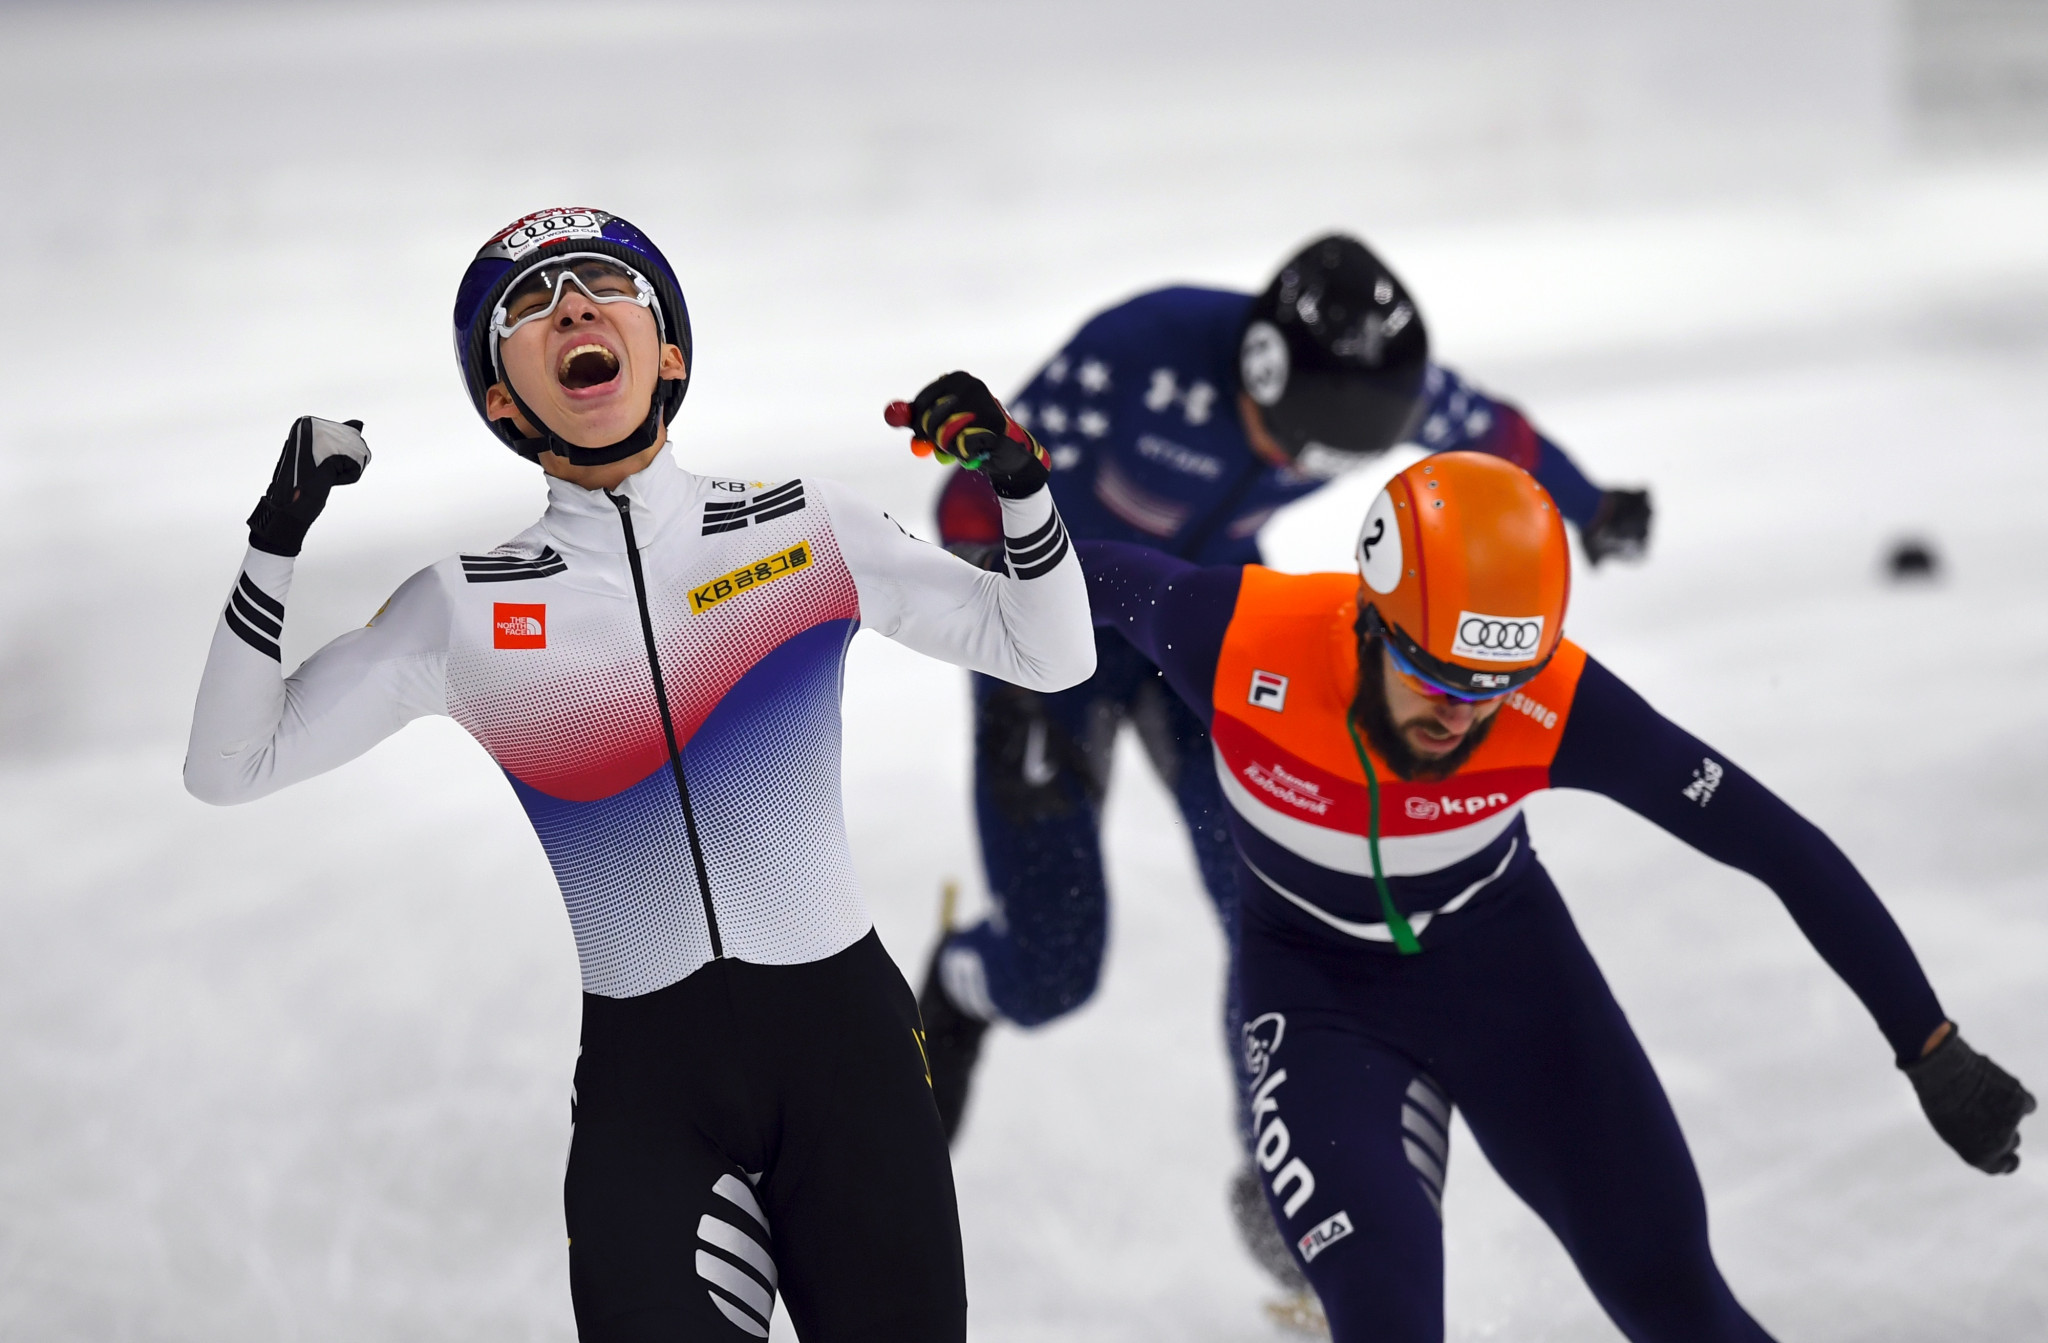 South Korea collect gold in the relay on the final day of the ISU Short Track Speed Skating World Cup